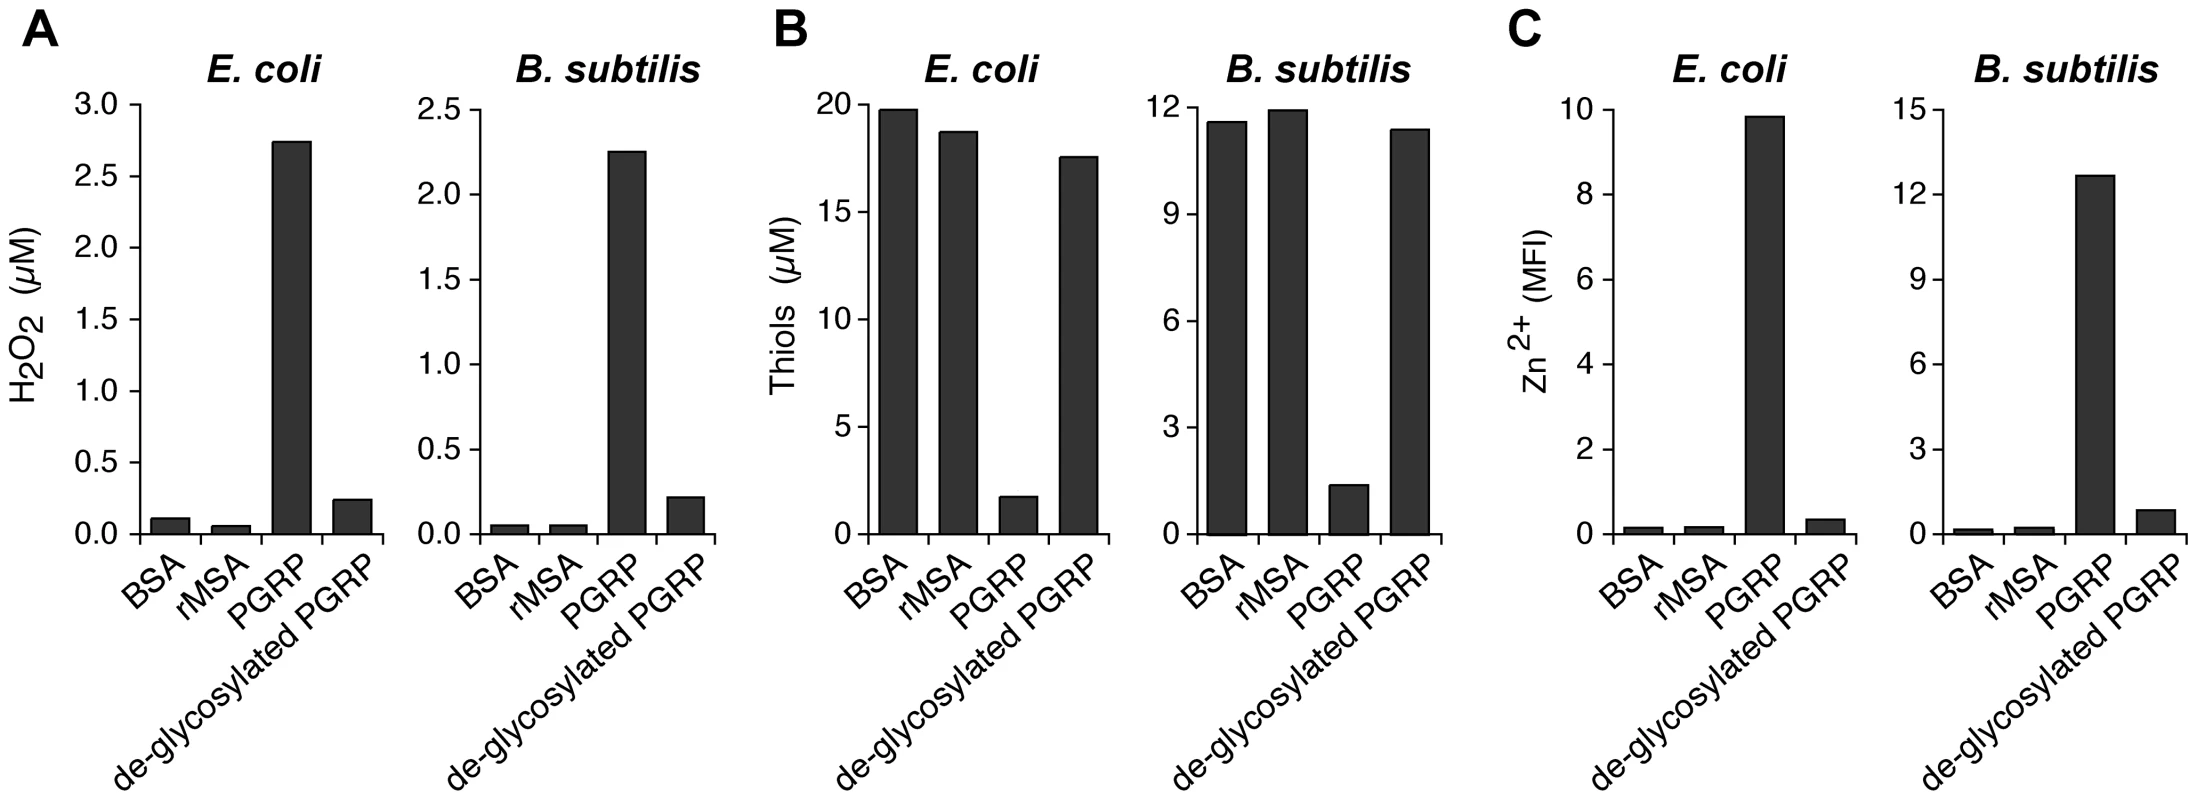 De-glycosylation abolishes the ability of PGRP to induce intracellular production of H<sub>2</sub>O<sub>2</sub>, depletion of cellular thiols, and increases in intracellular Zn<sup>2+</sup>.